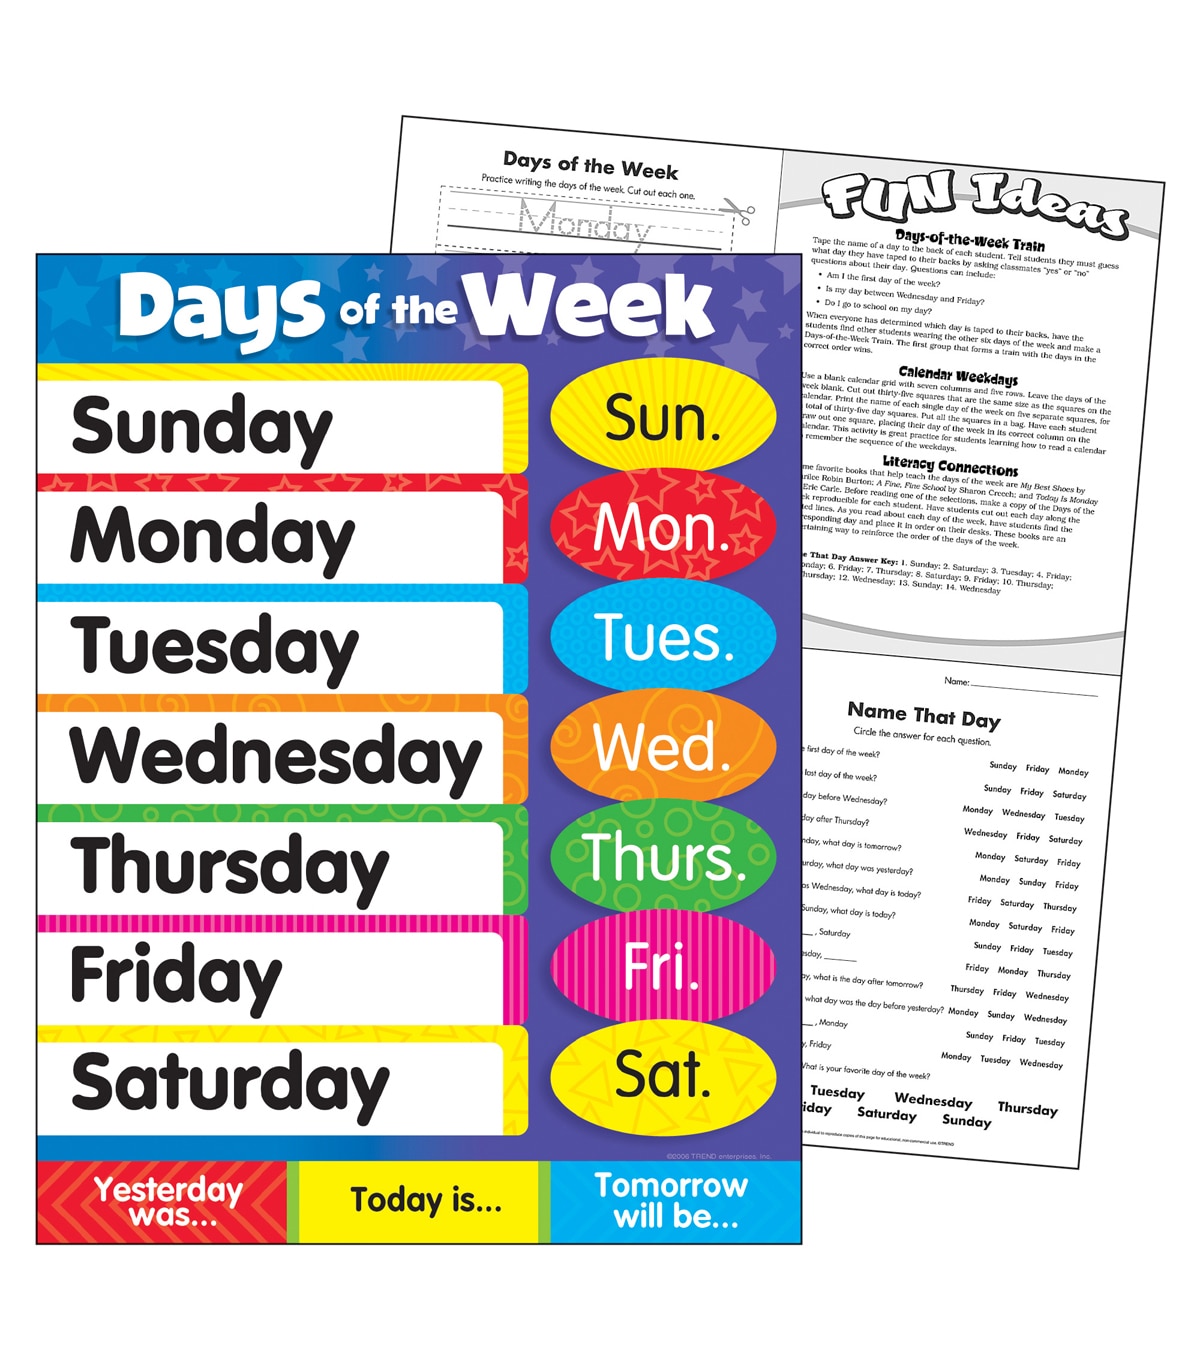 Days Of The Week Chart Ideas